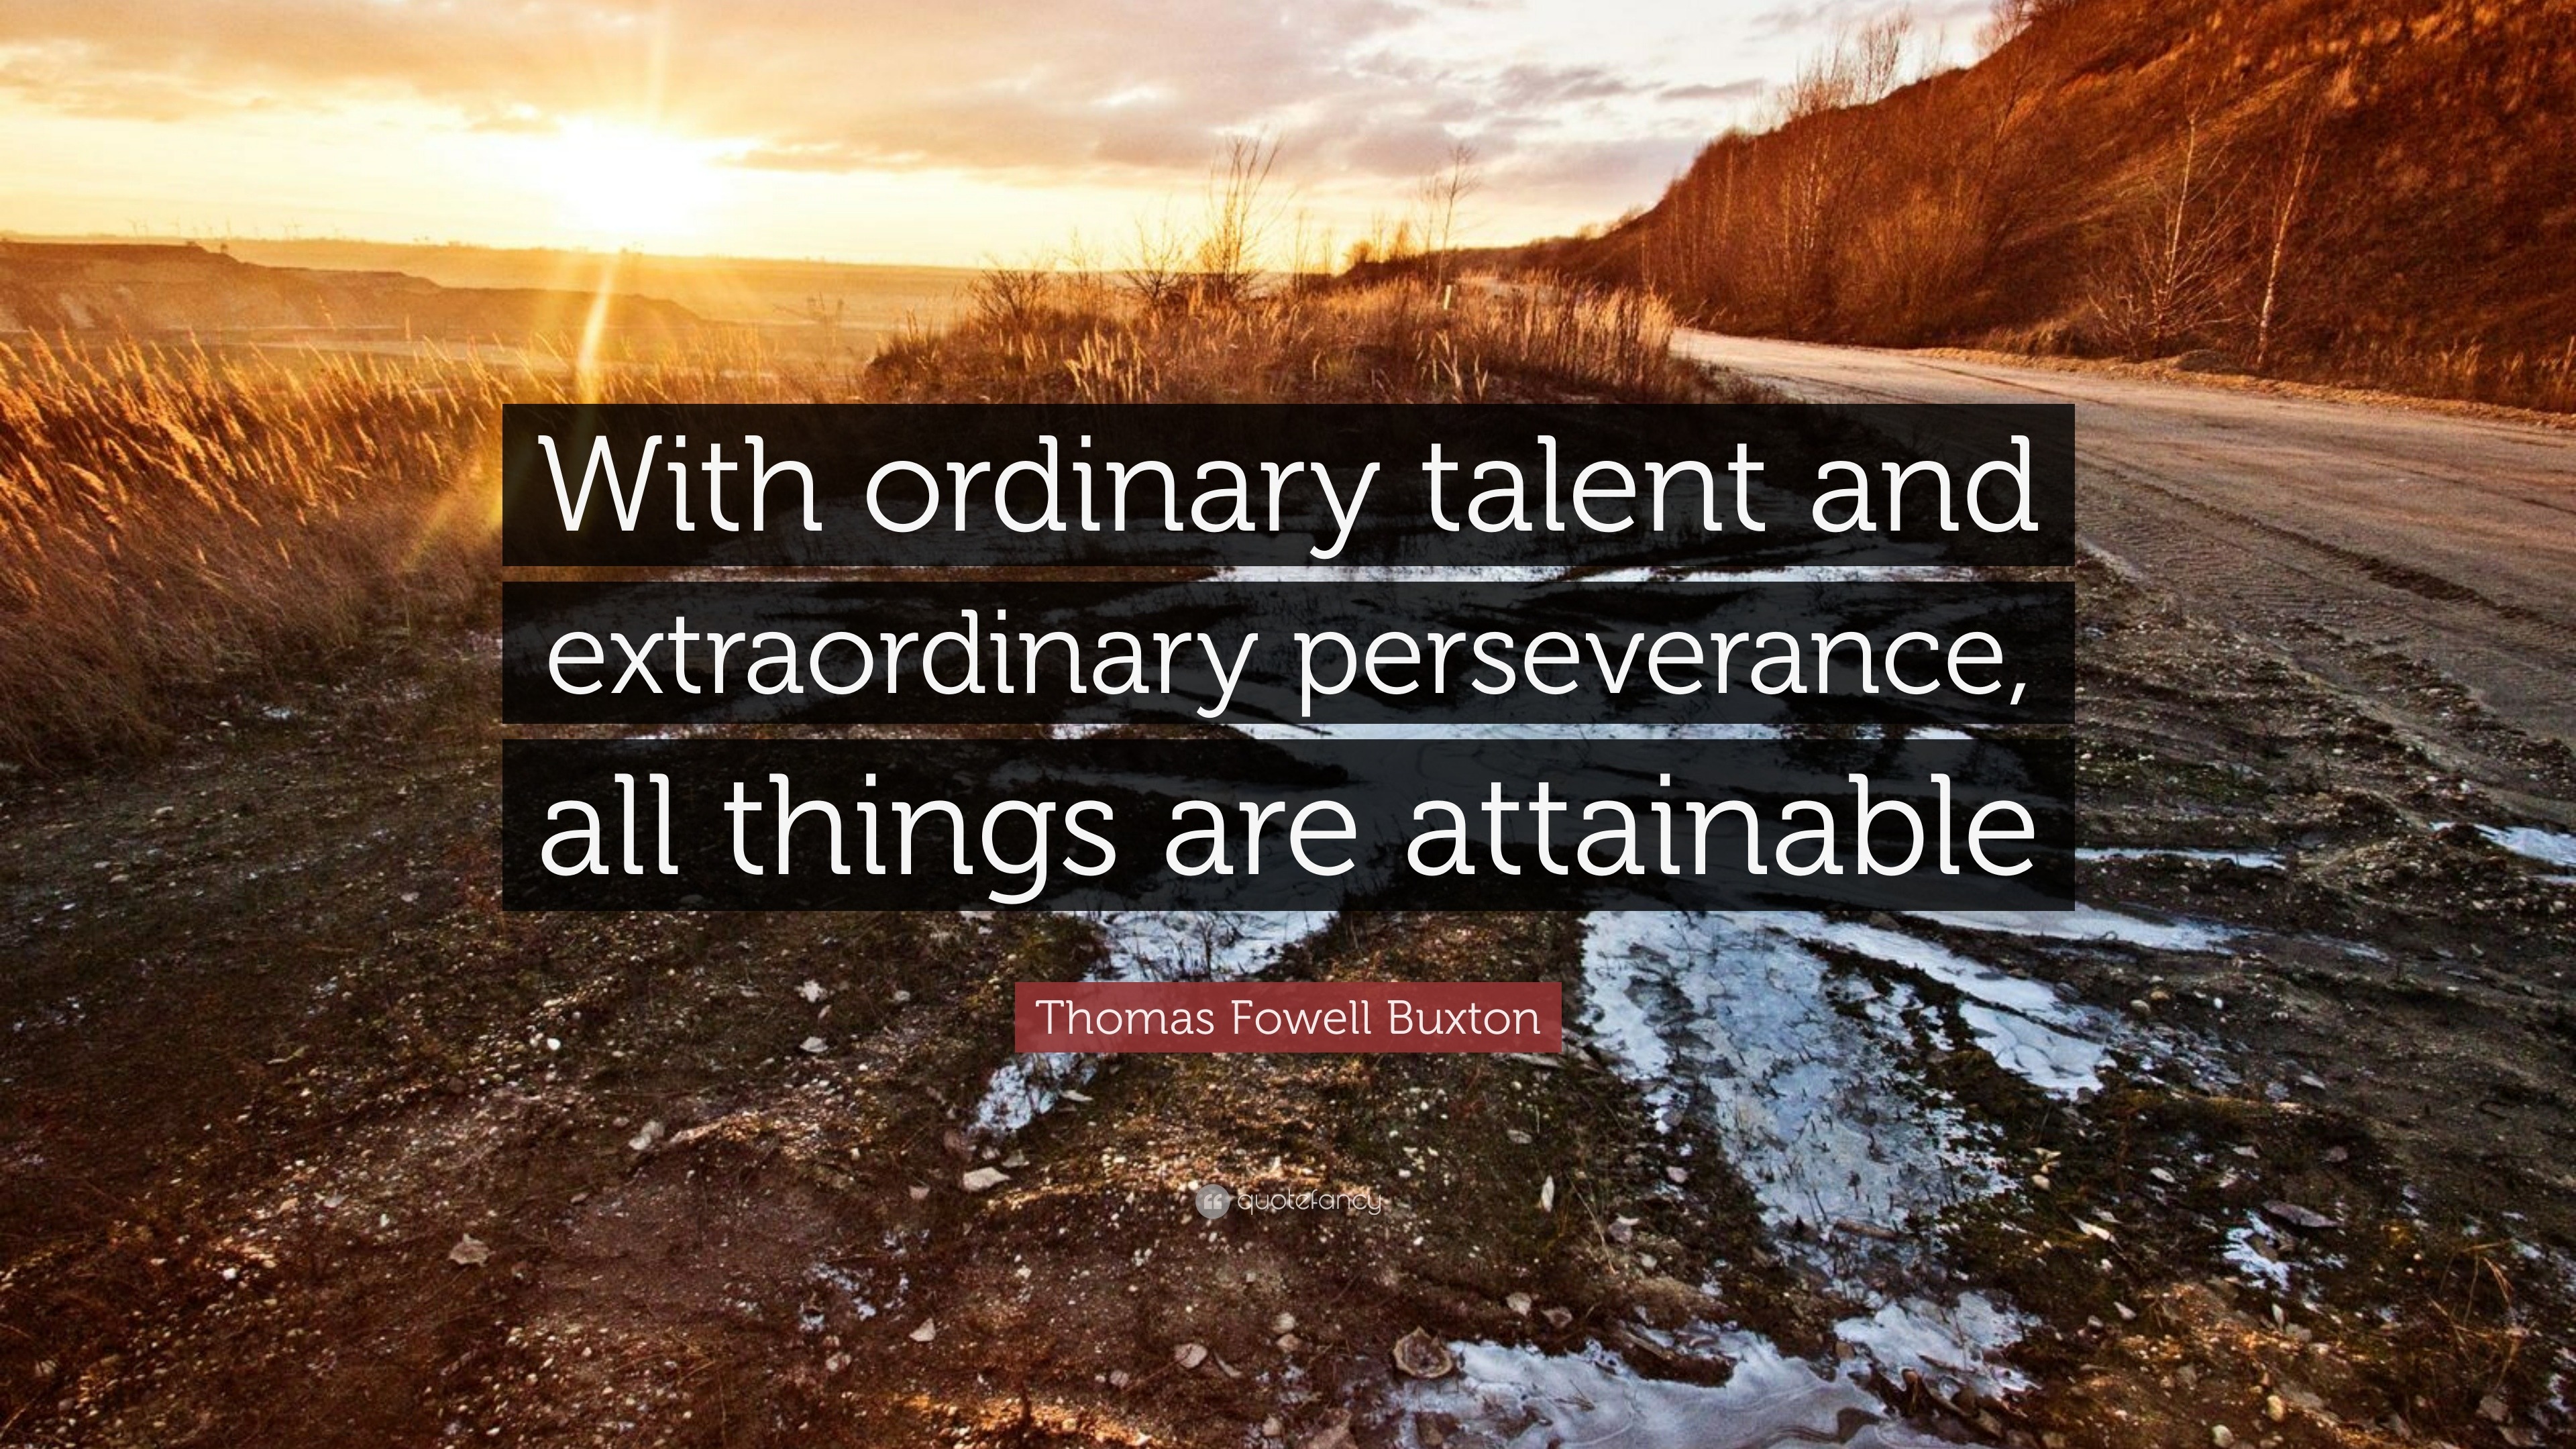 Thomas Fowell Buxton Quote: “With ordinary talent and extraordinary ...